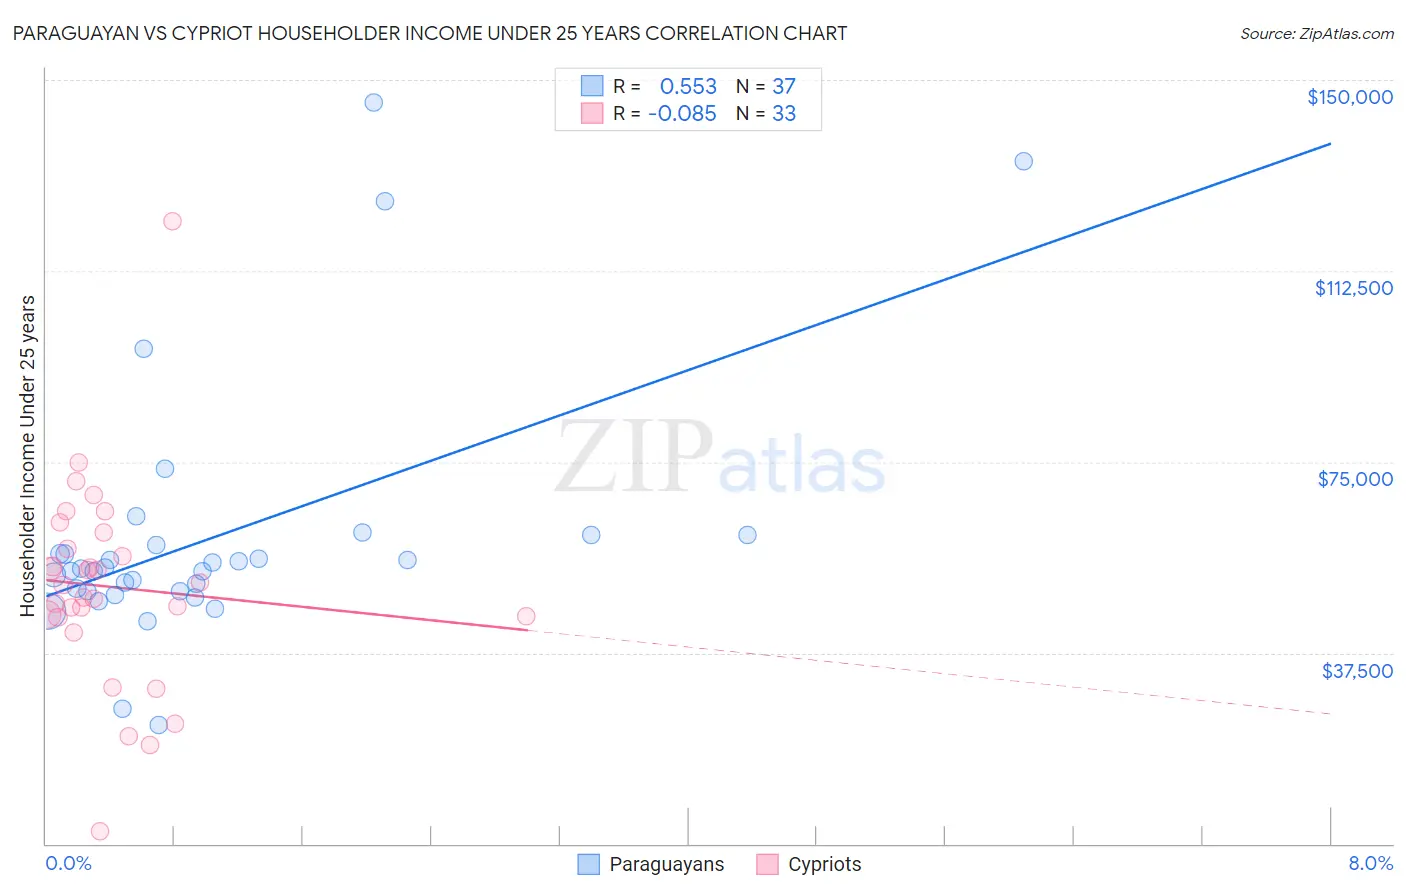 Paraguayan vs Cypriot Householder Income Under 25 years